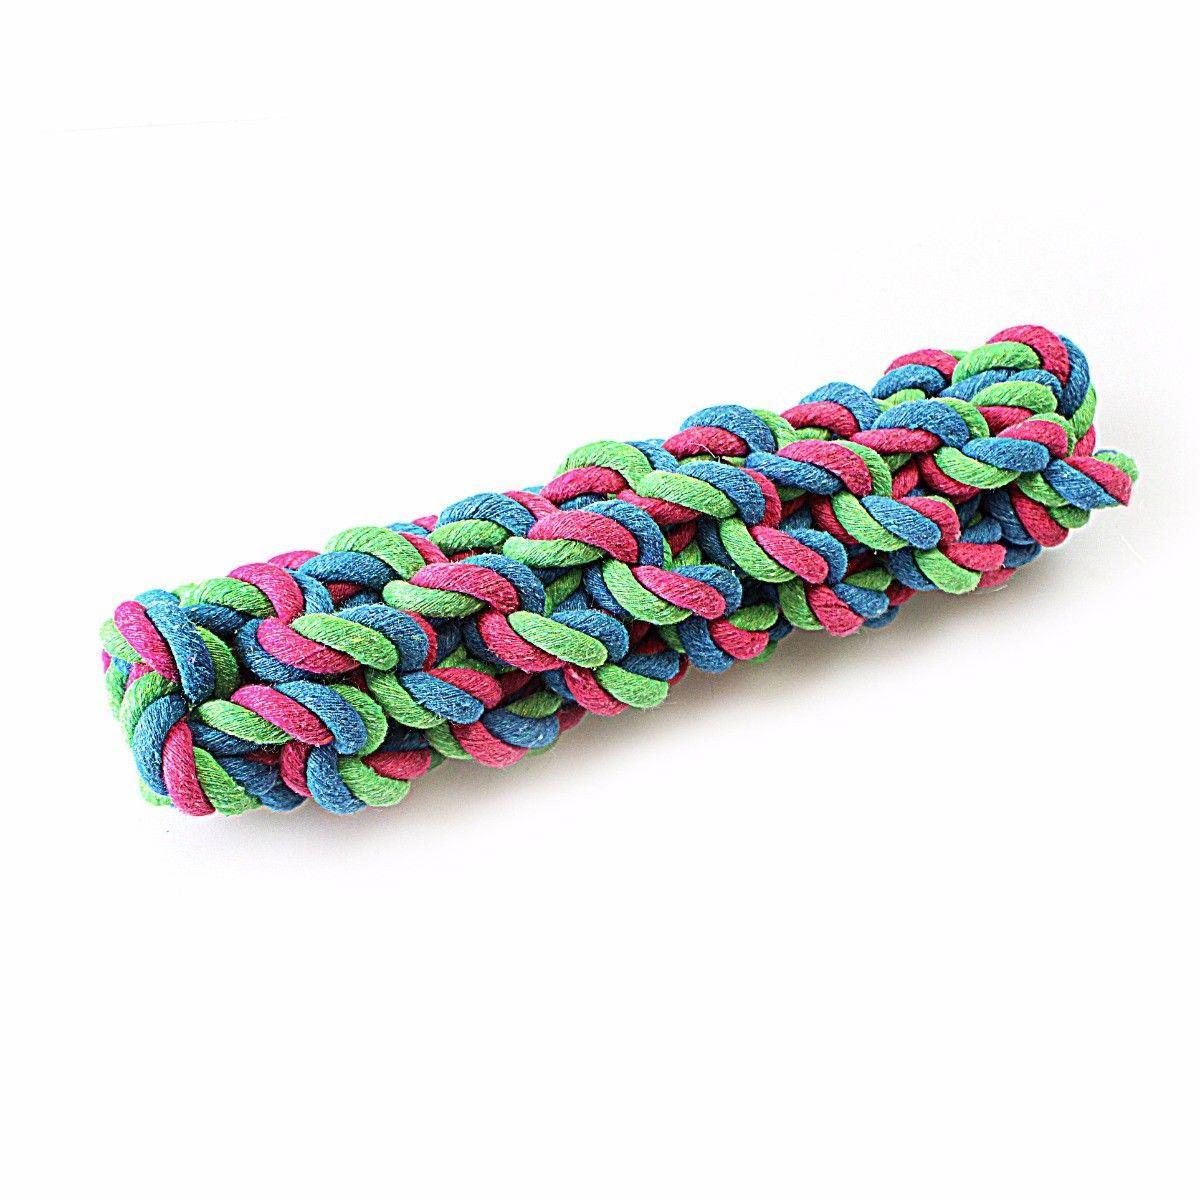 Tough Cotton Dog / Puppy Twisted Strong Chewable Knot For Healthy Dog Teeth Pet 4102 (Parcel Rate)